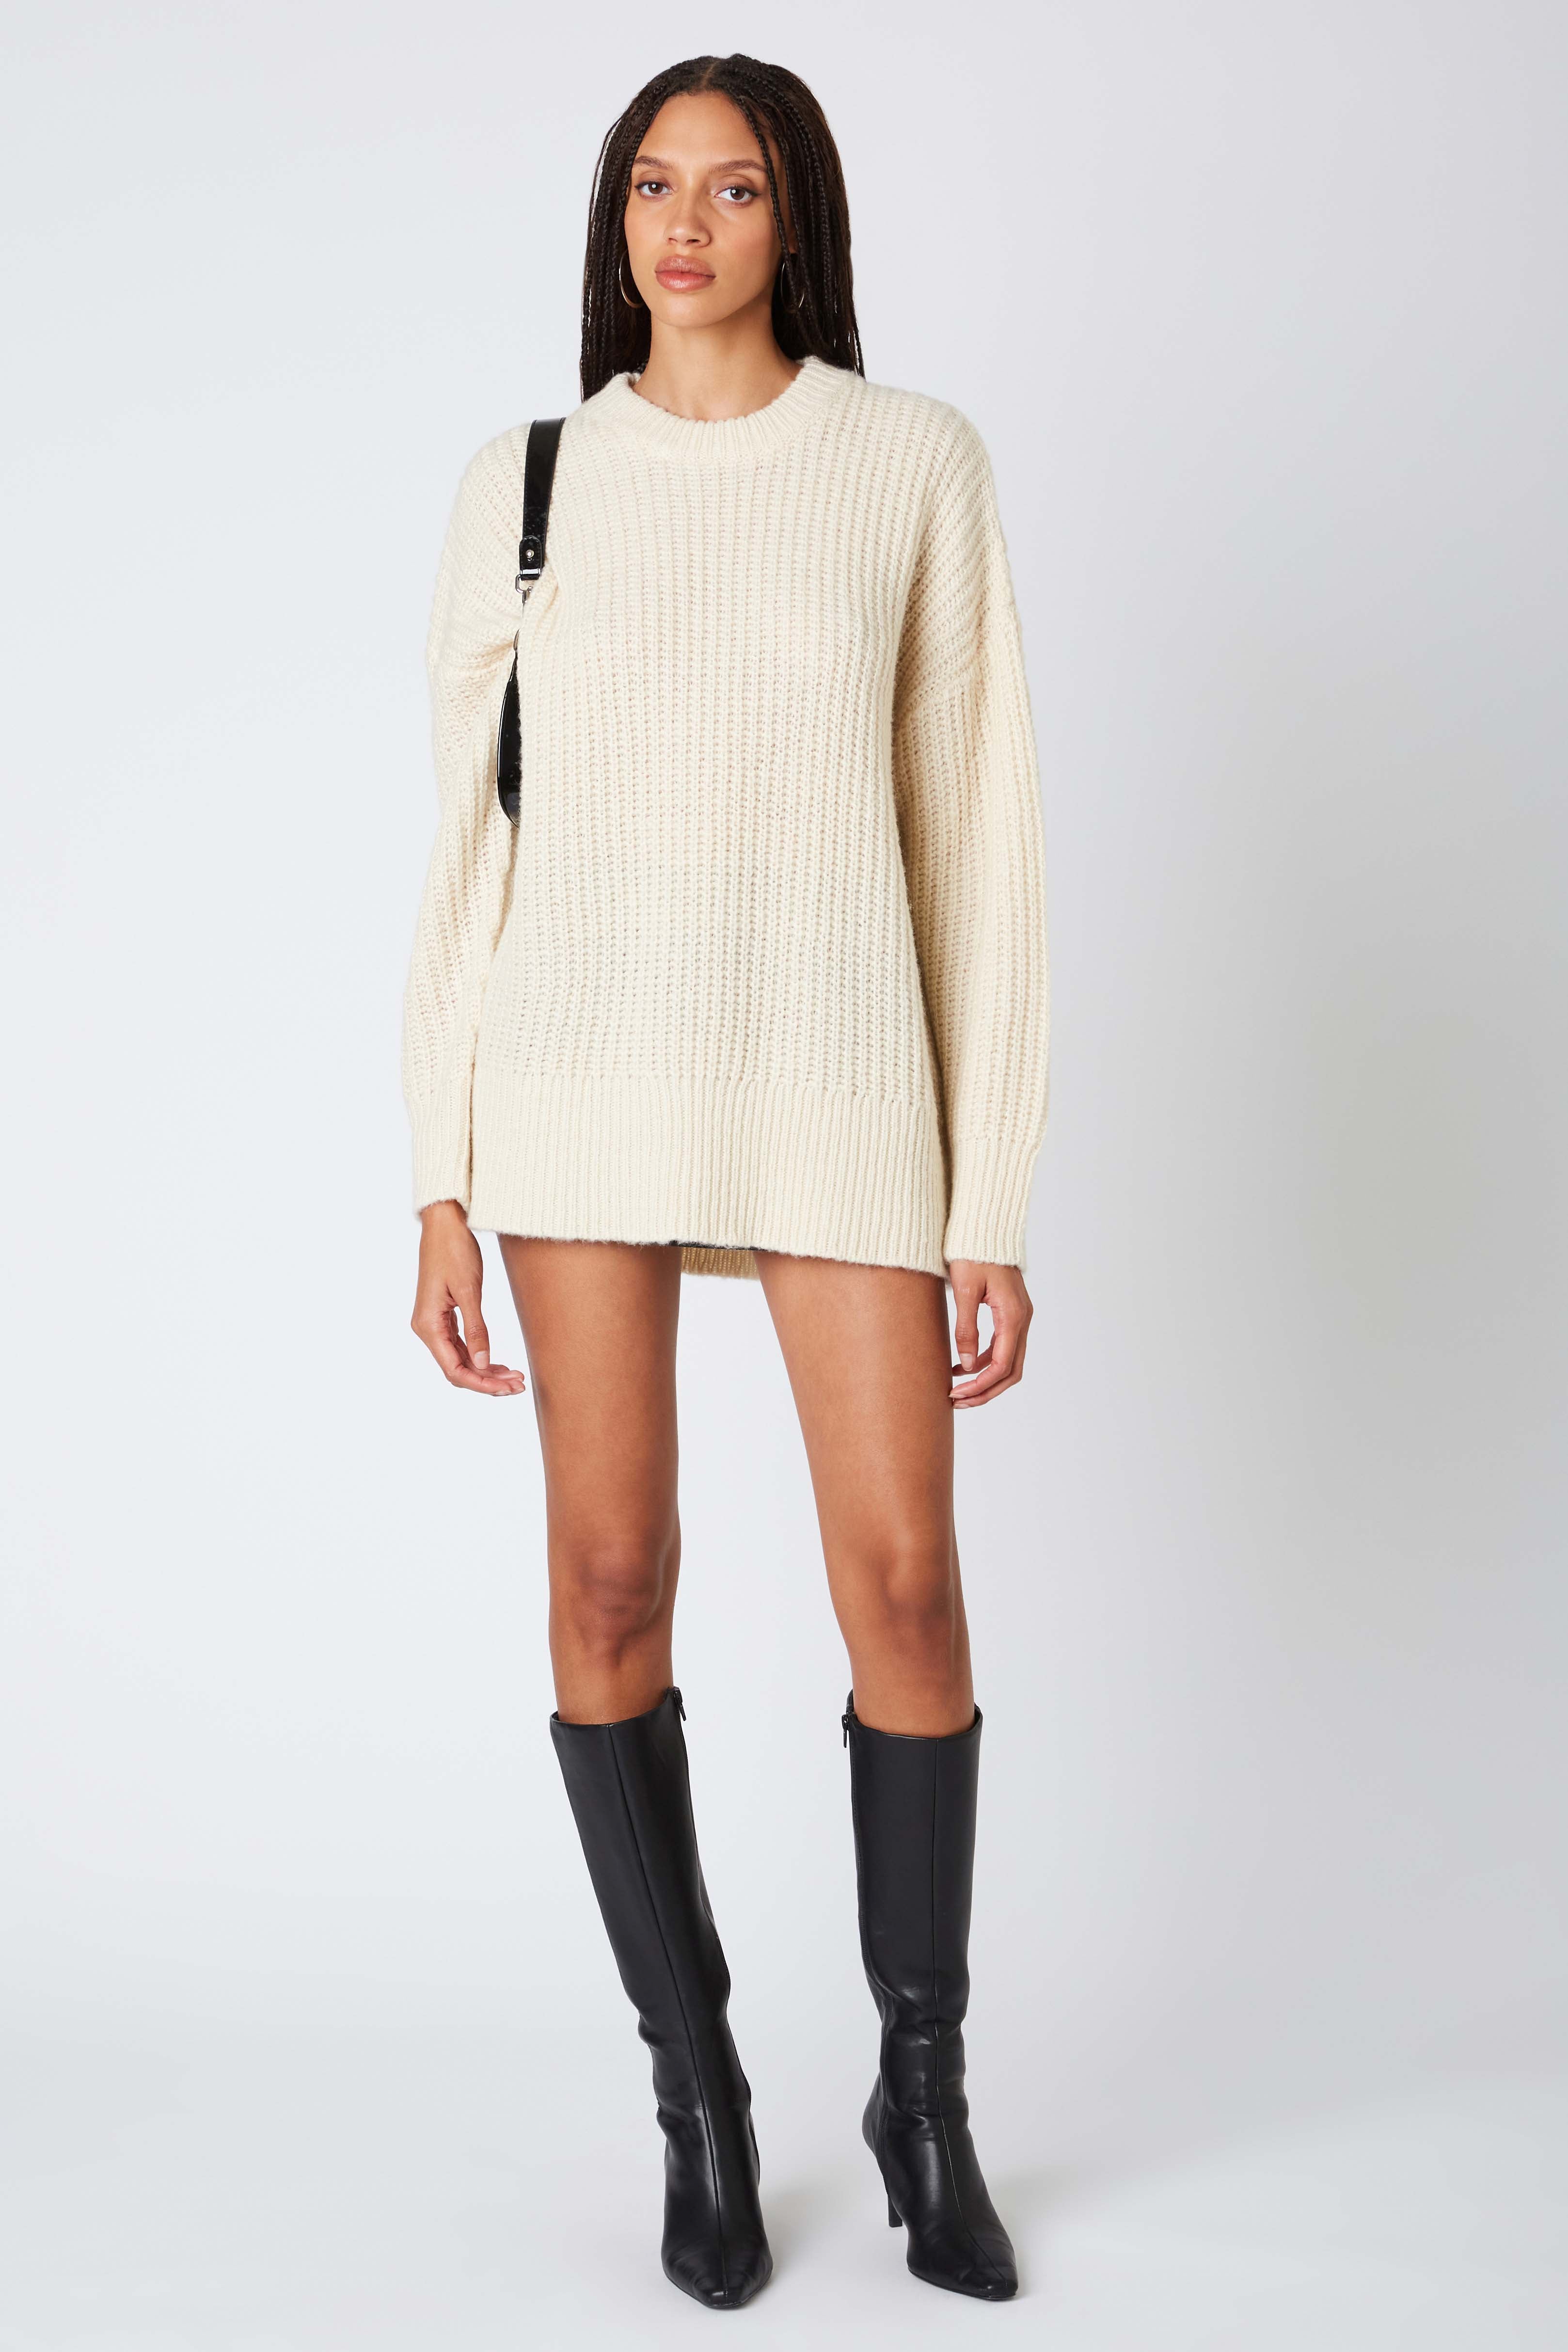 Oversized Knitted Sweater in Ivory Front View